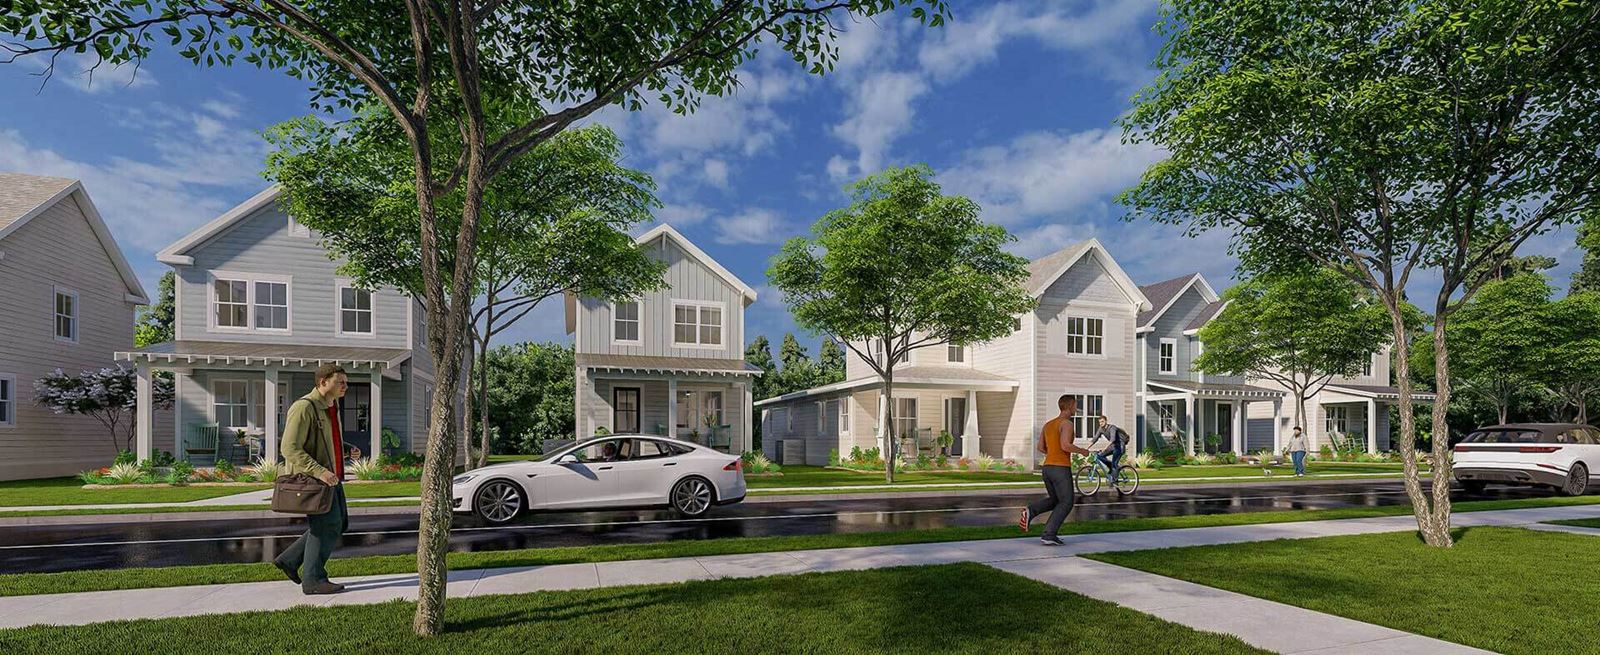 Streetscape rendering of New Leaf Builders new home construction in Wilmington NC.